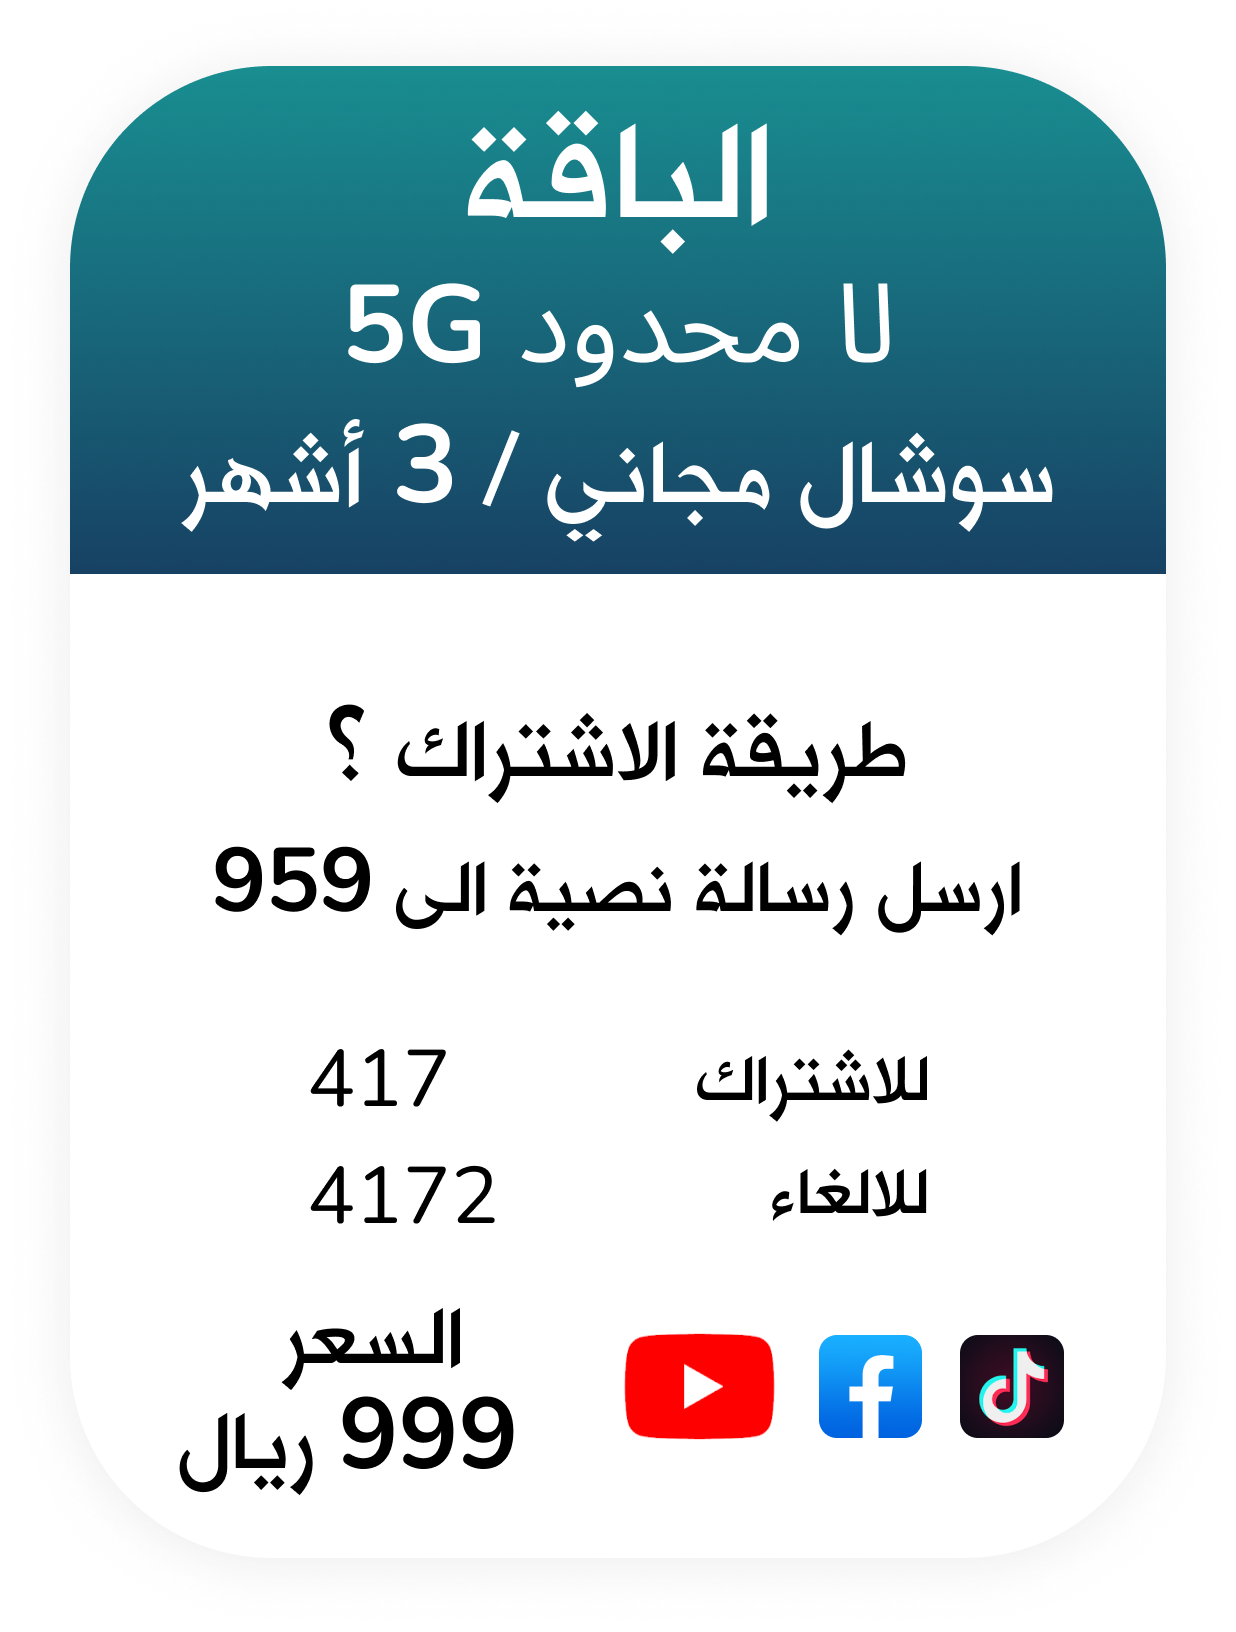 unlimited 5g